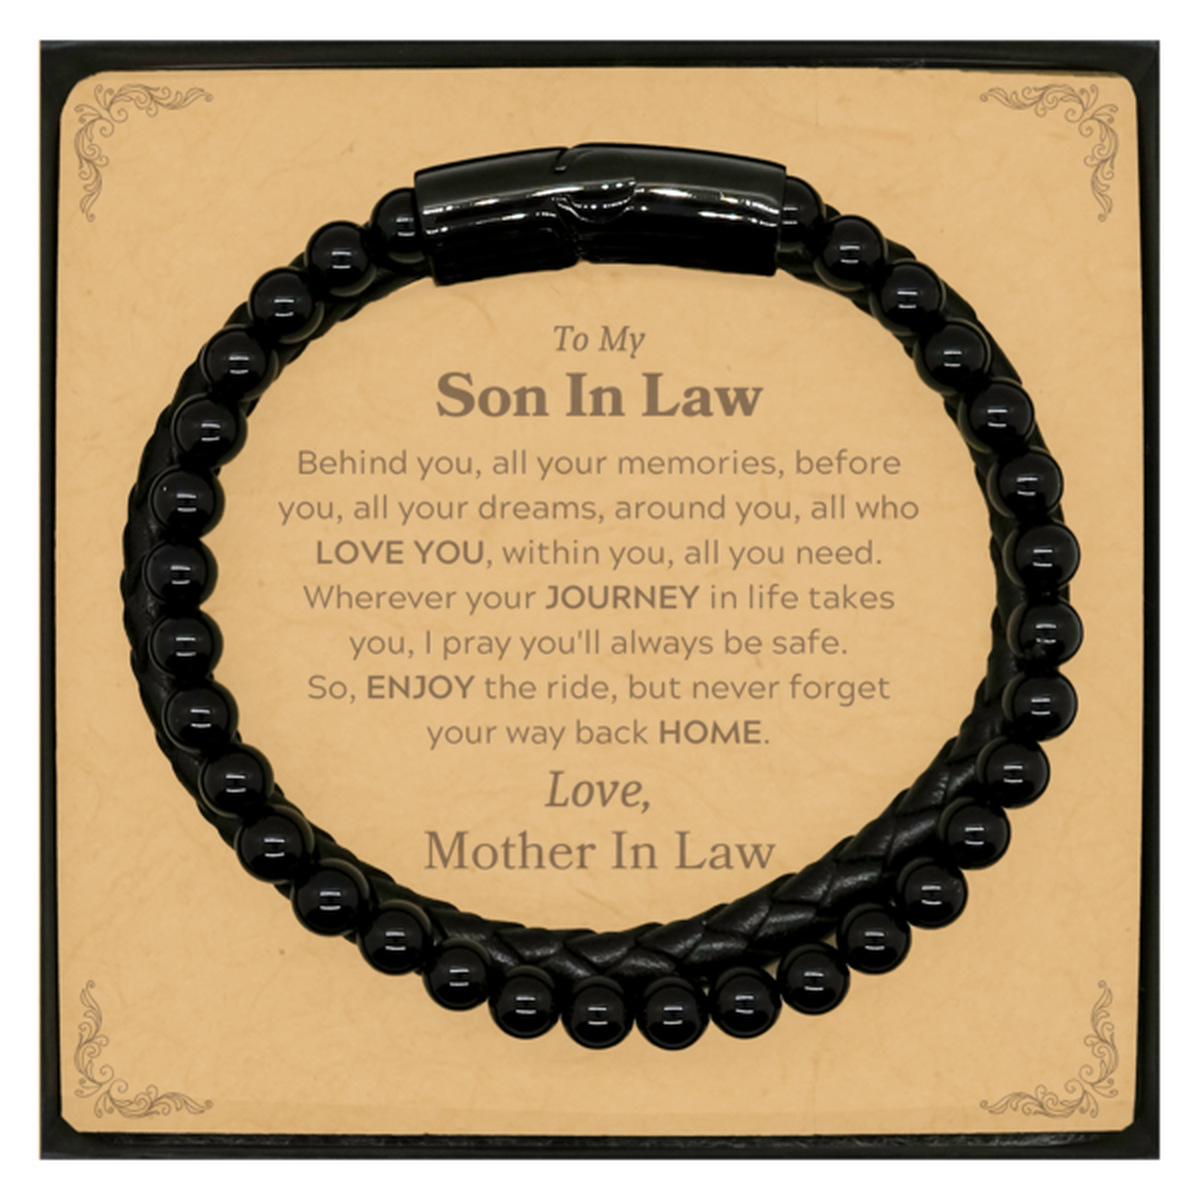 To My Son In Law Graduation Gifts from Mother In Law, Son In Law Stone Leather Bracelets Christmas Birthday Gifts for Son In Law Behind you, all your memories, before you, all your dreams. Love, Mother In Law